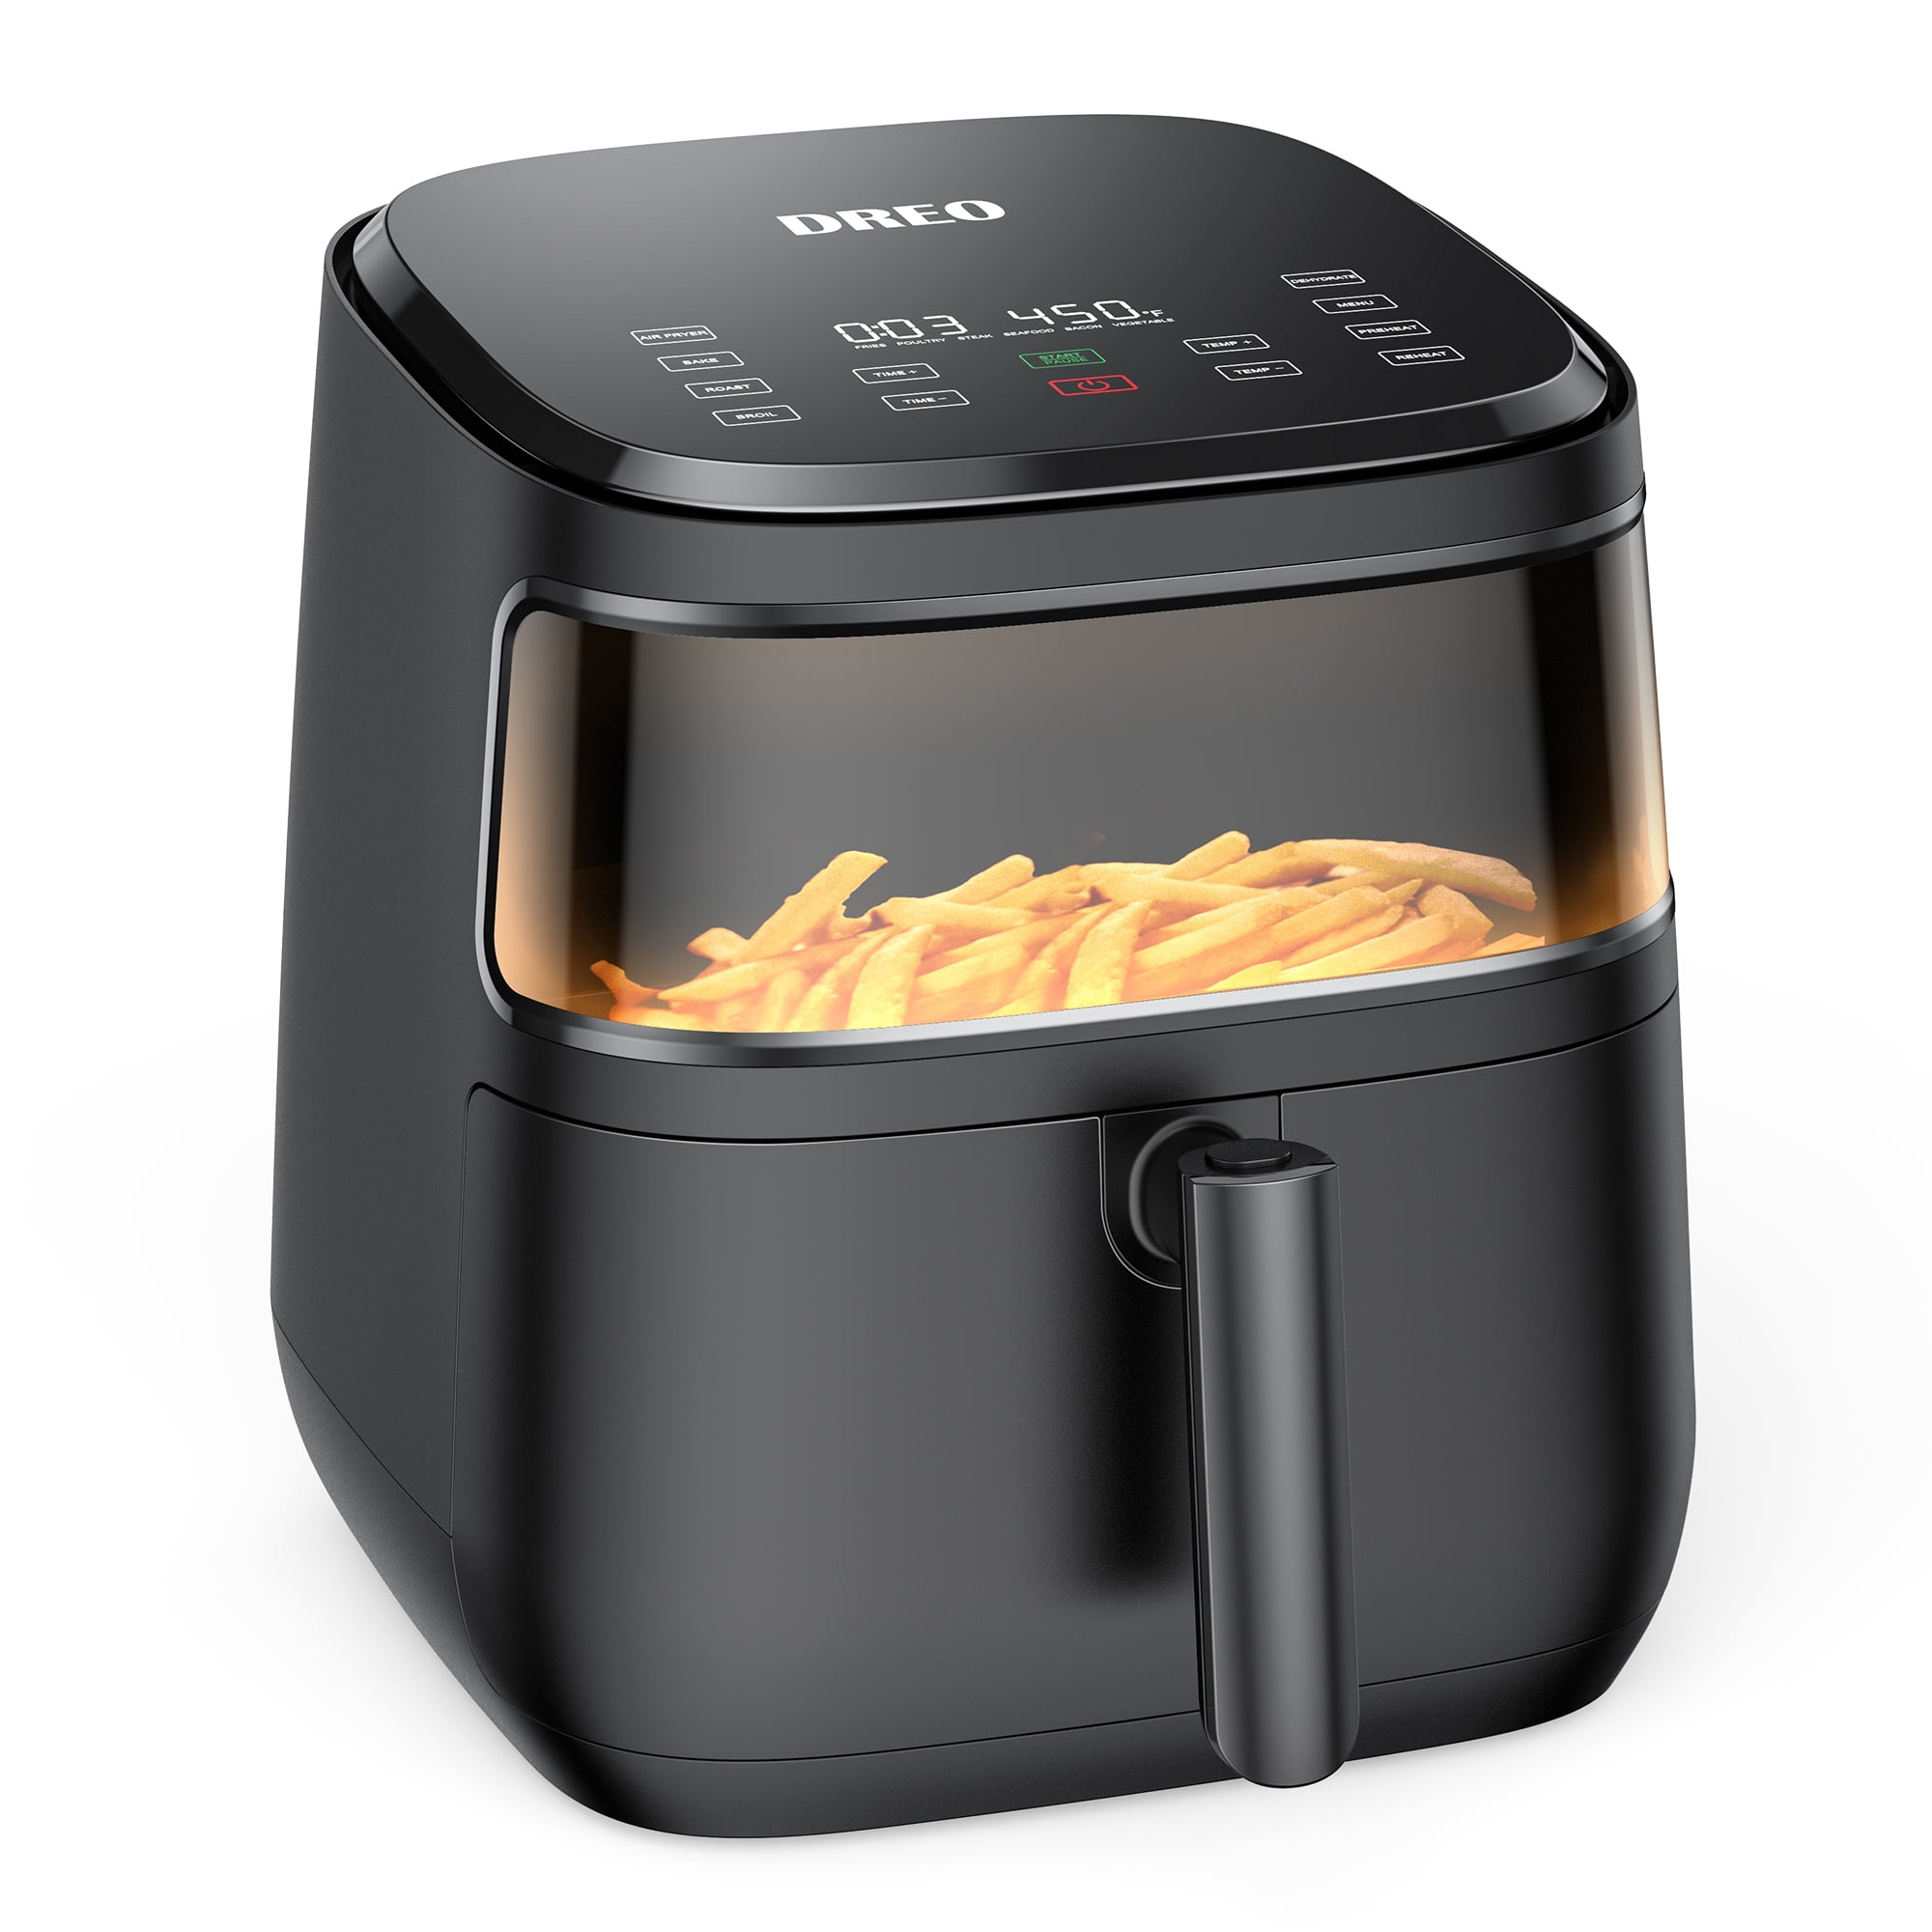  Dreo ChefMaker Combi Fryer, Cook like a pro with just the press  of a button, Smart Air Fryer Cooker with Cook probe, Water Atomizer, 3  professional cooking modes, 6 QT 